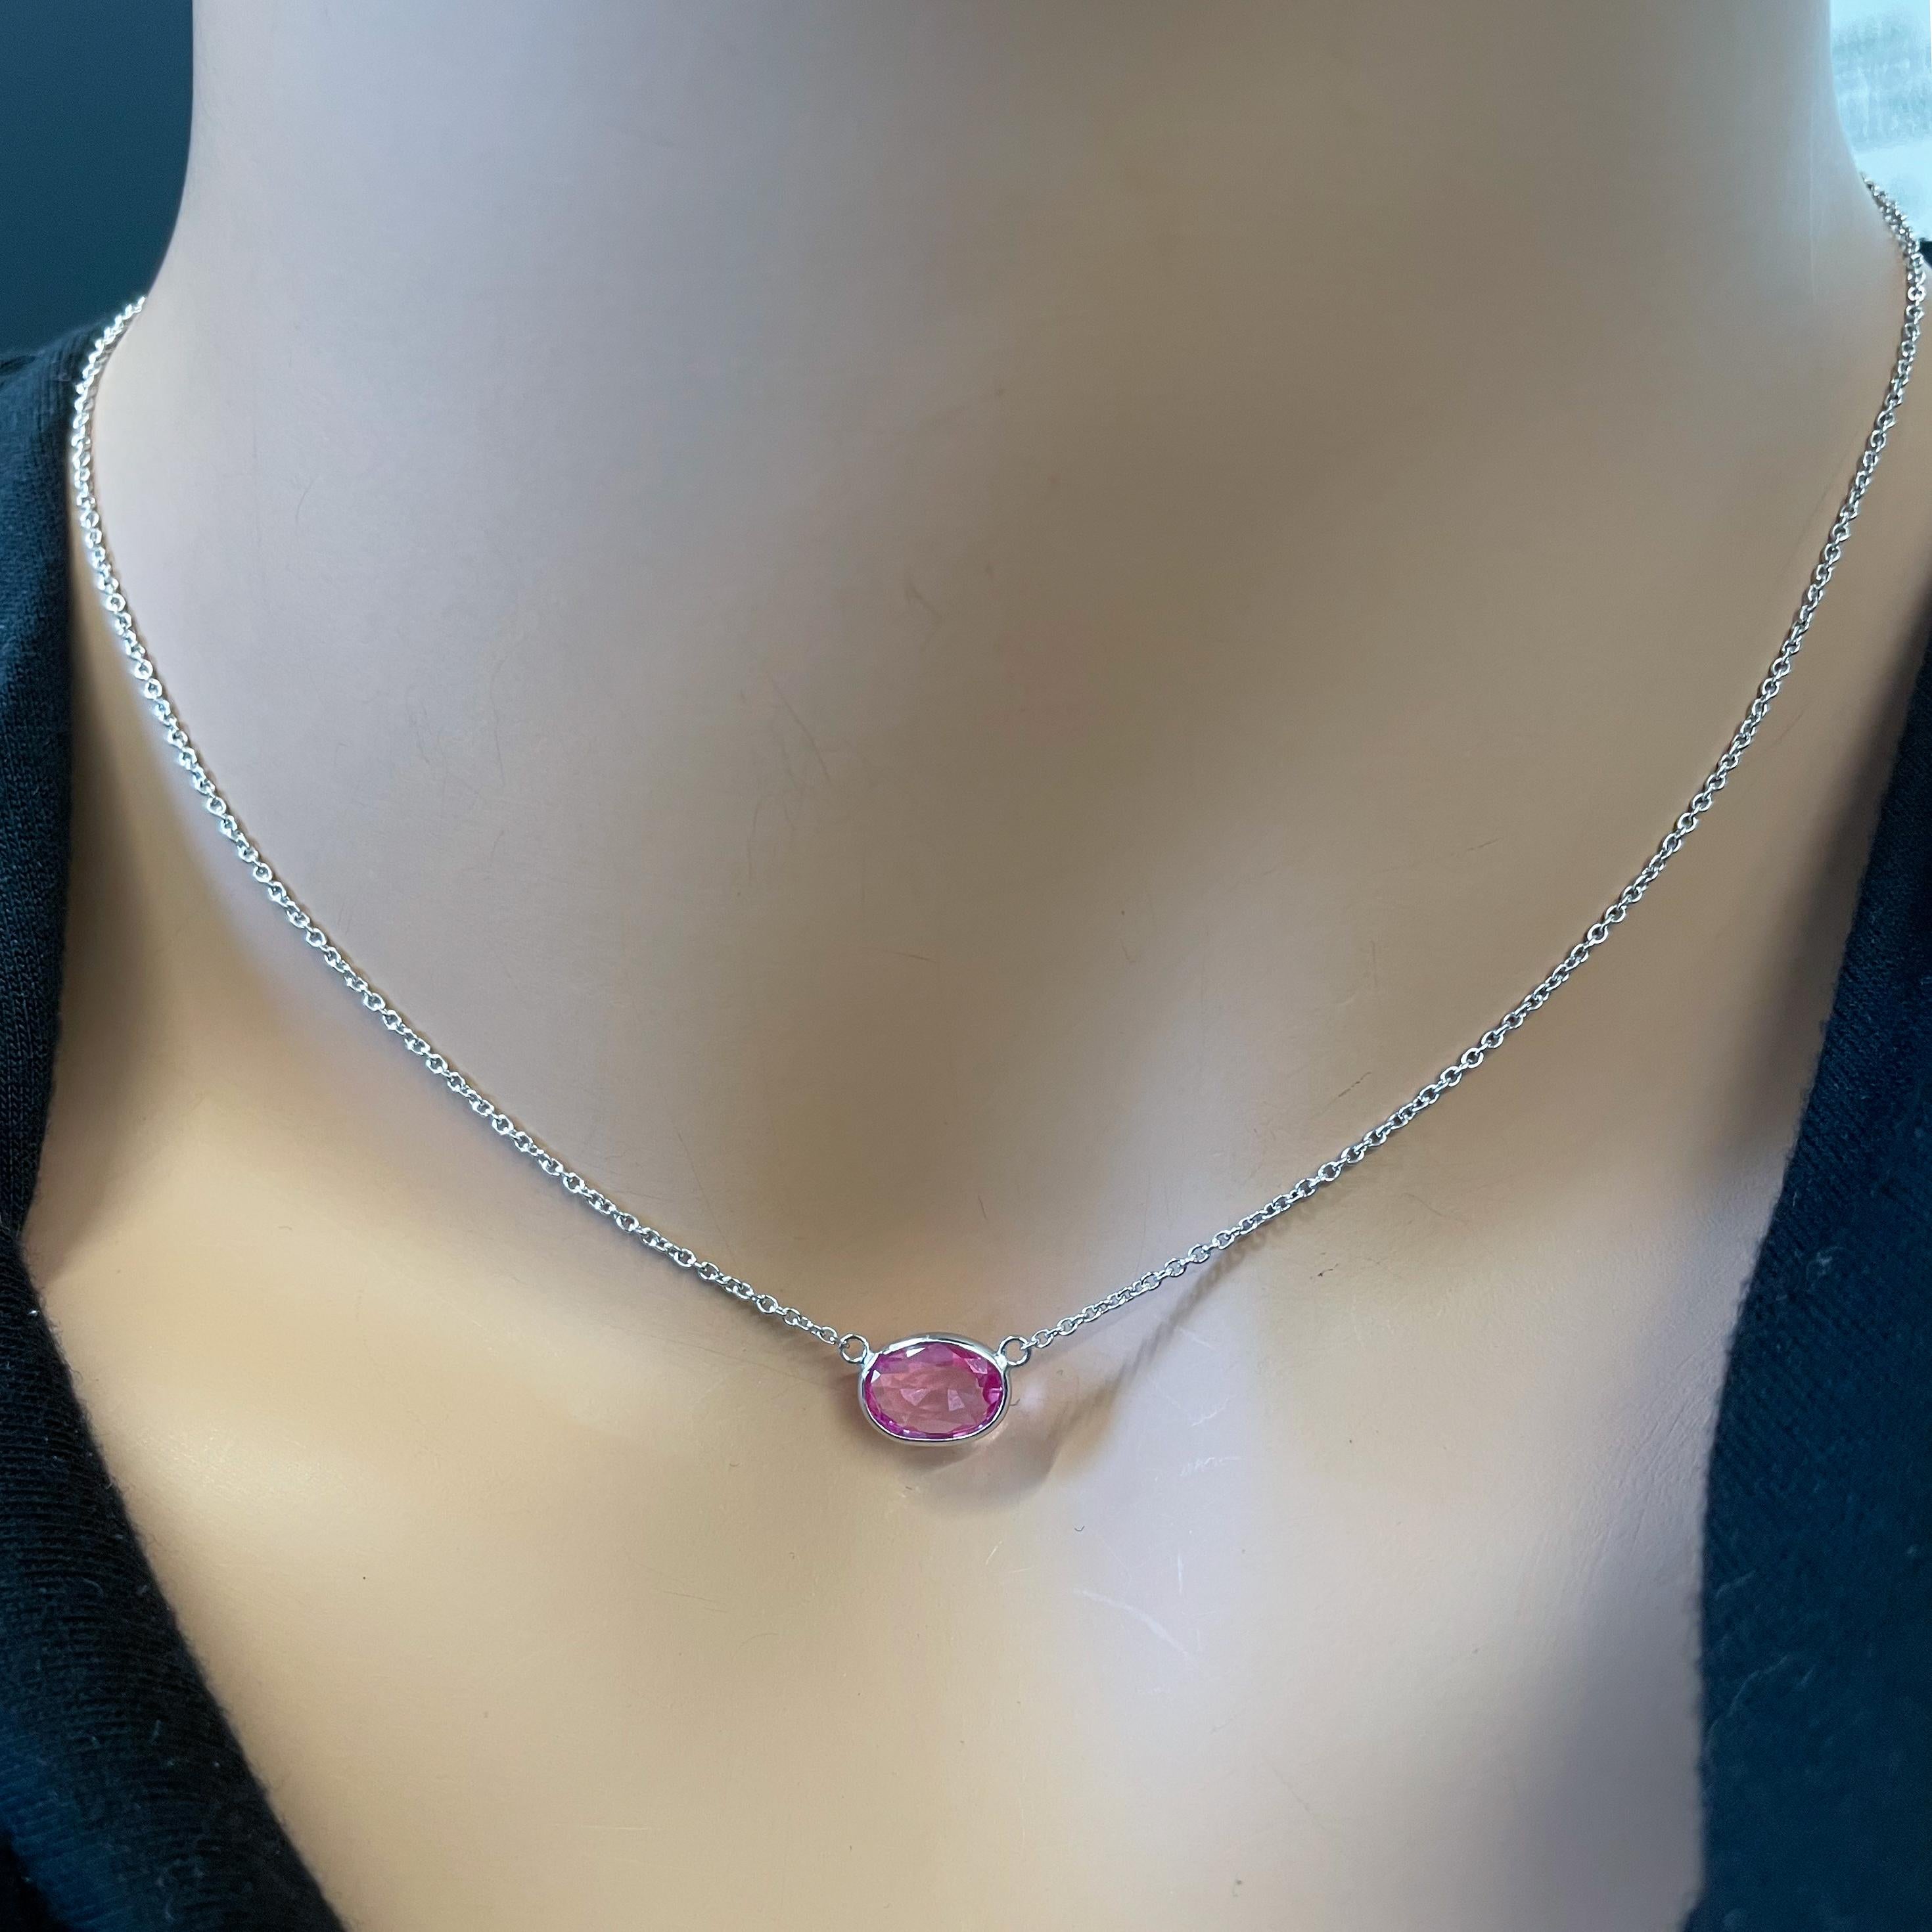 1.56 Carat Pink Padparadschah Oval Cut Fashion Necklaces In 14K White Gold  In New Condition For Sale In Chicago, IL